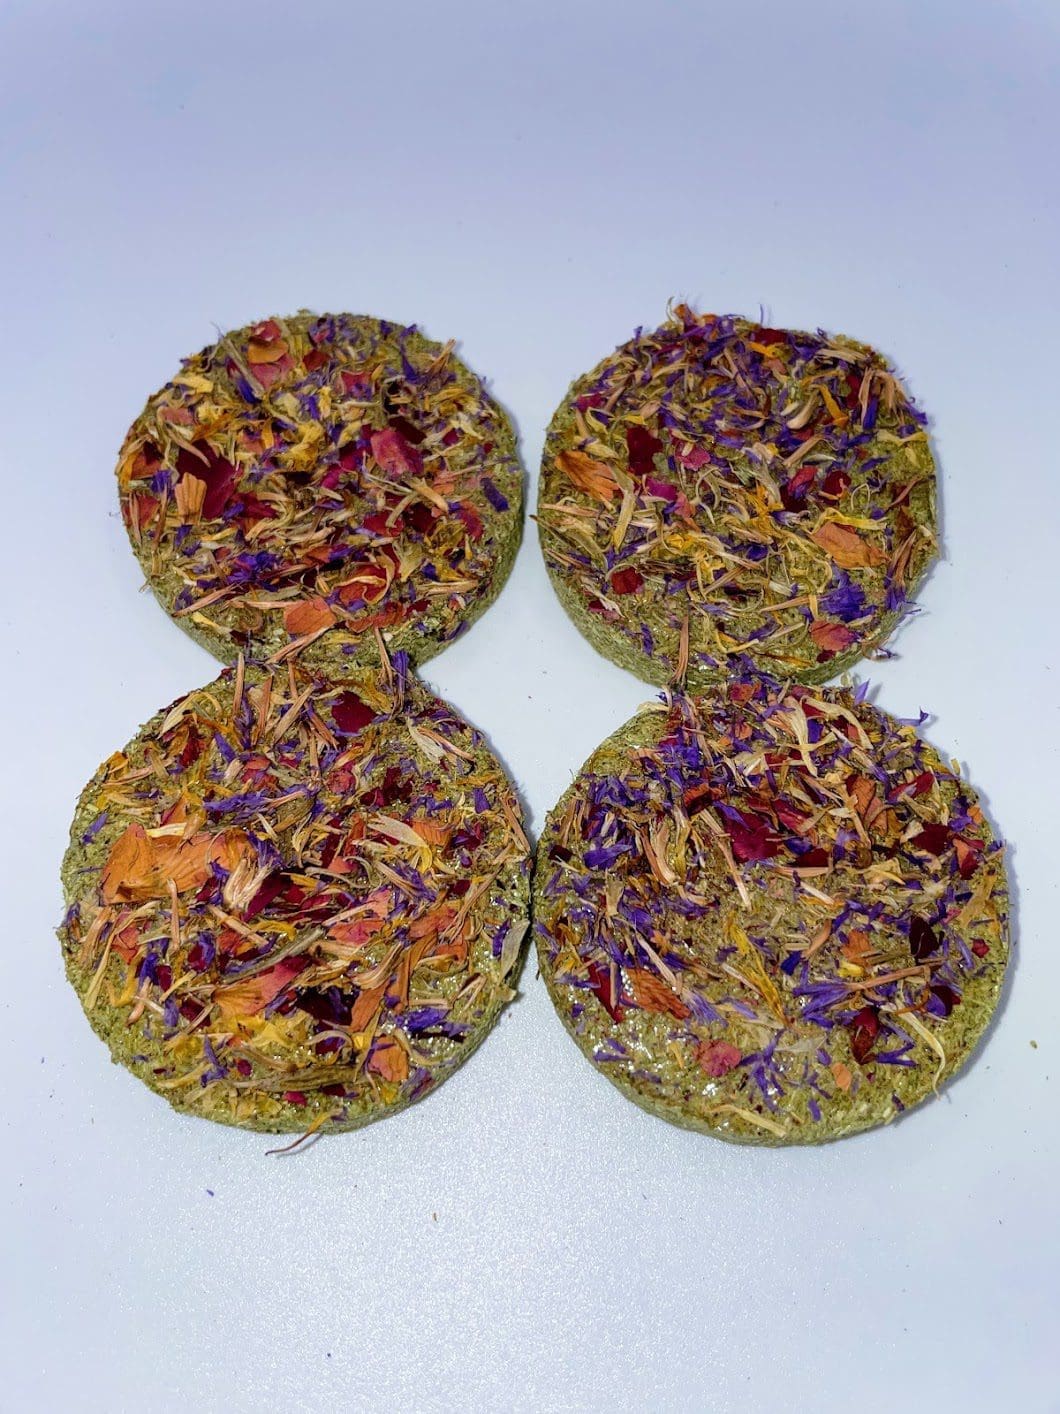 Timothy Hay Floral Grass Biscuit Treat With Petals Treat For Rabbits, Hamsters, Guinea Pigs, Chinchillas & Small Rodents